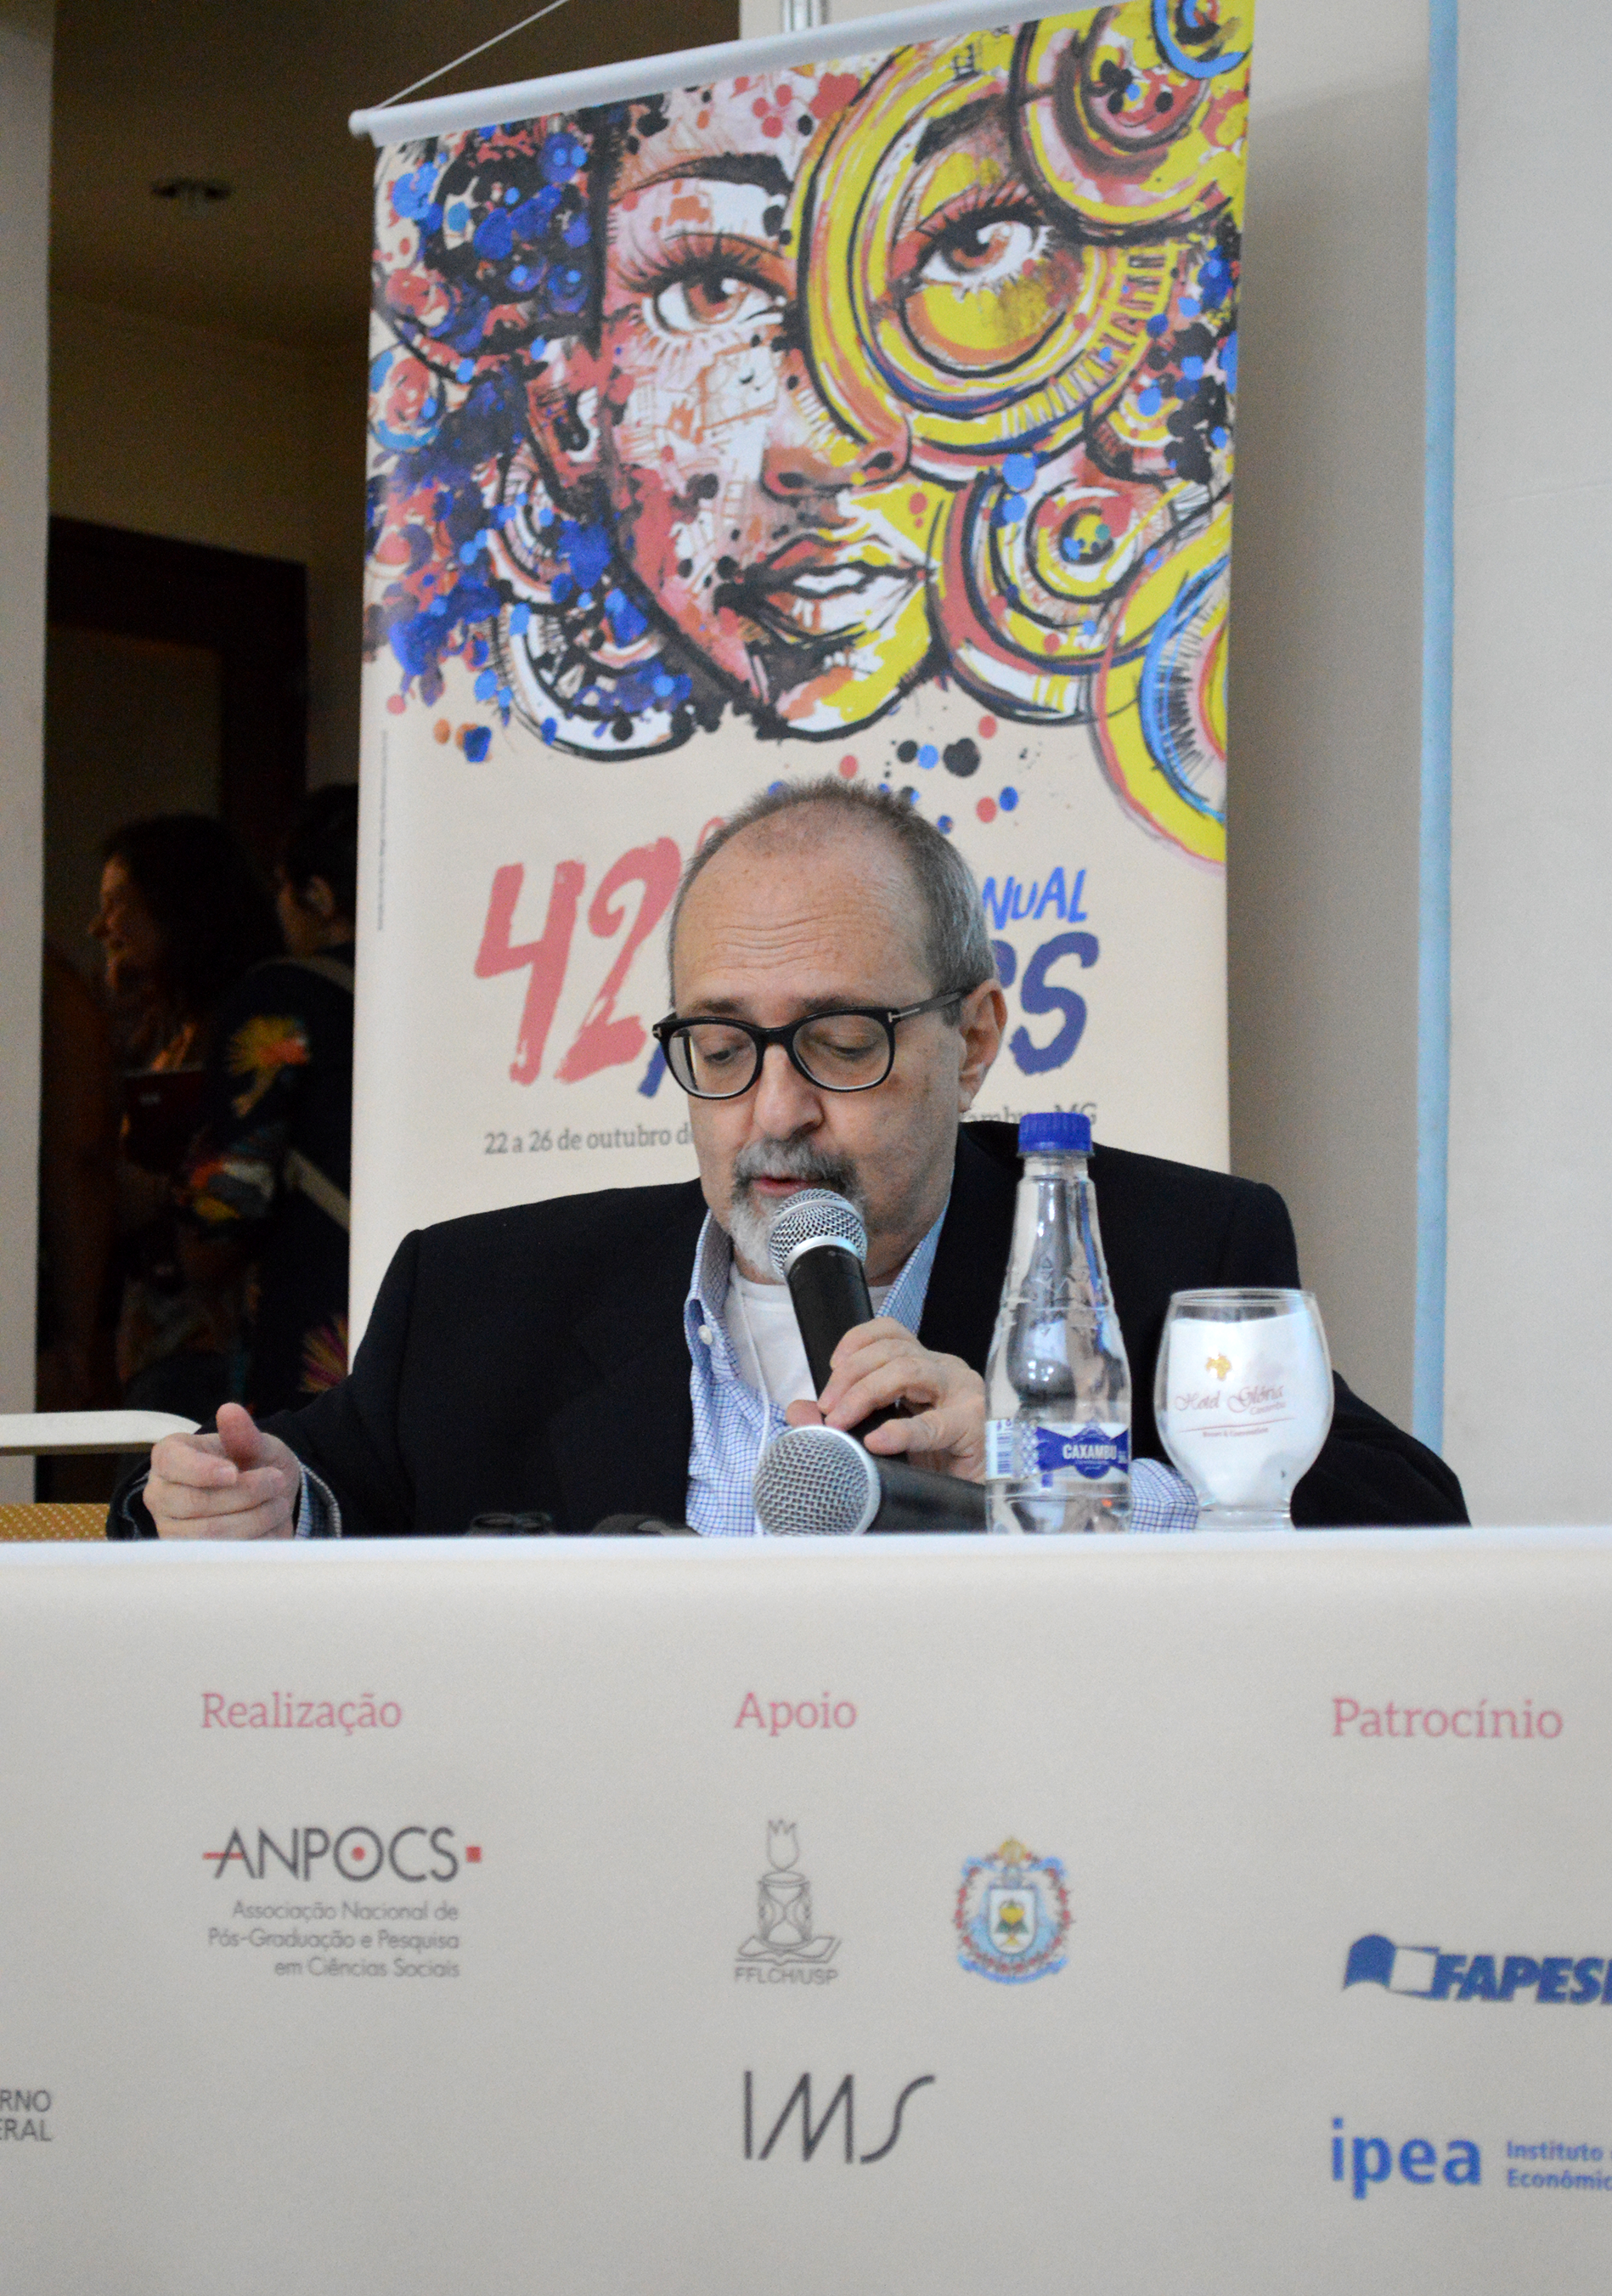 Prof. Sérgio Adorno at the opening of the meeting